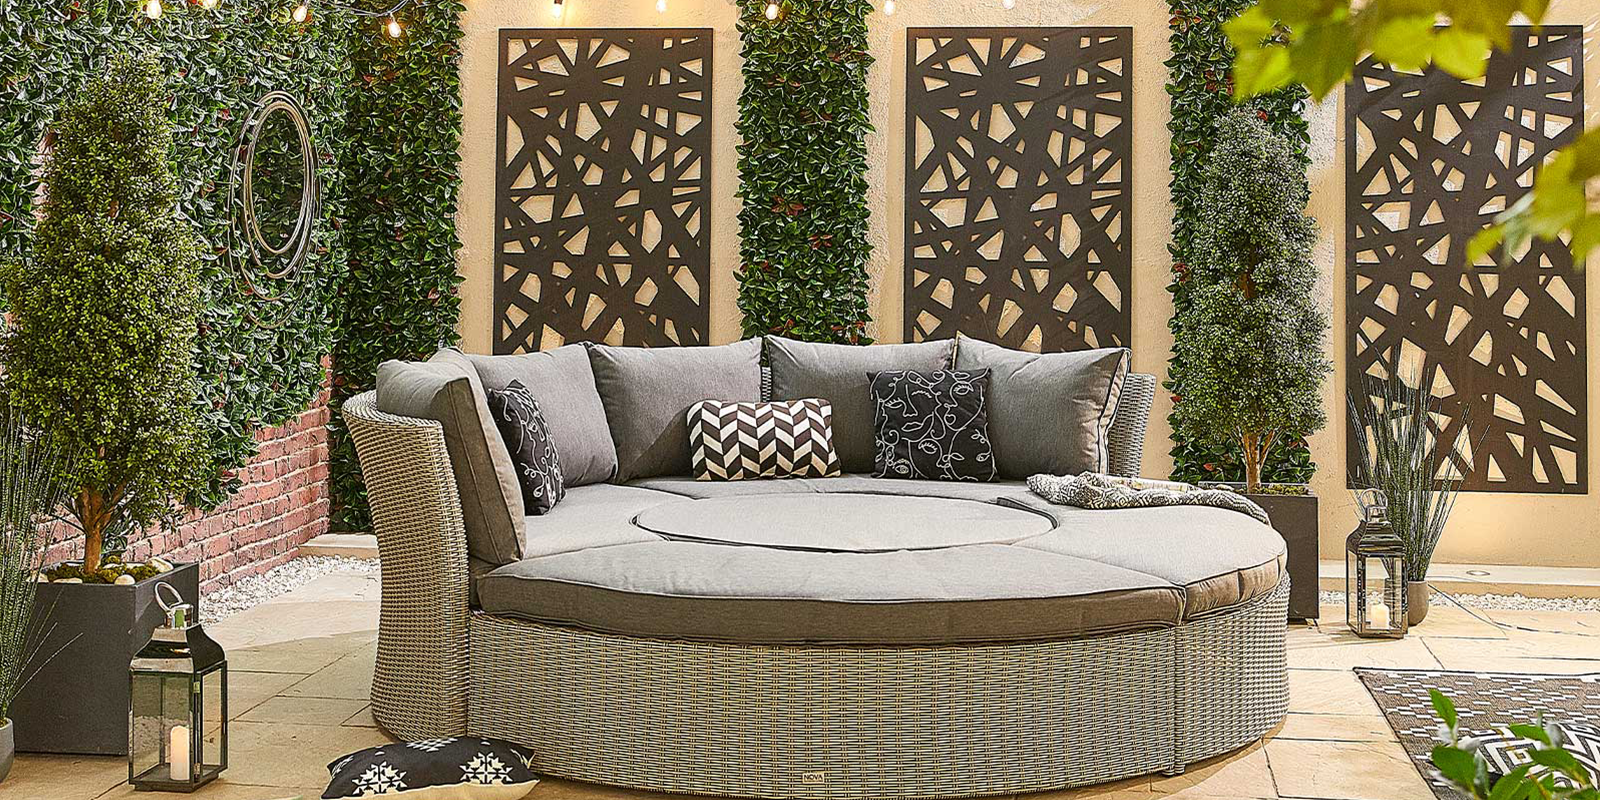 Choosing A Rattan Daybed